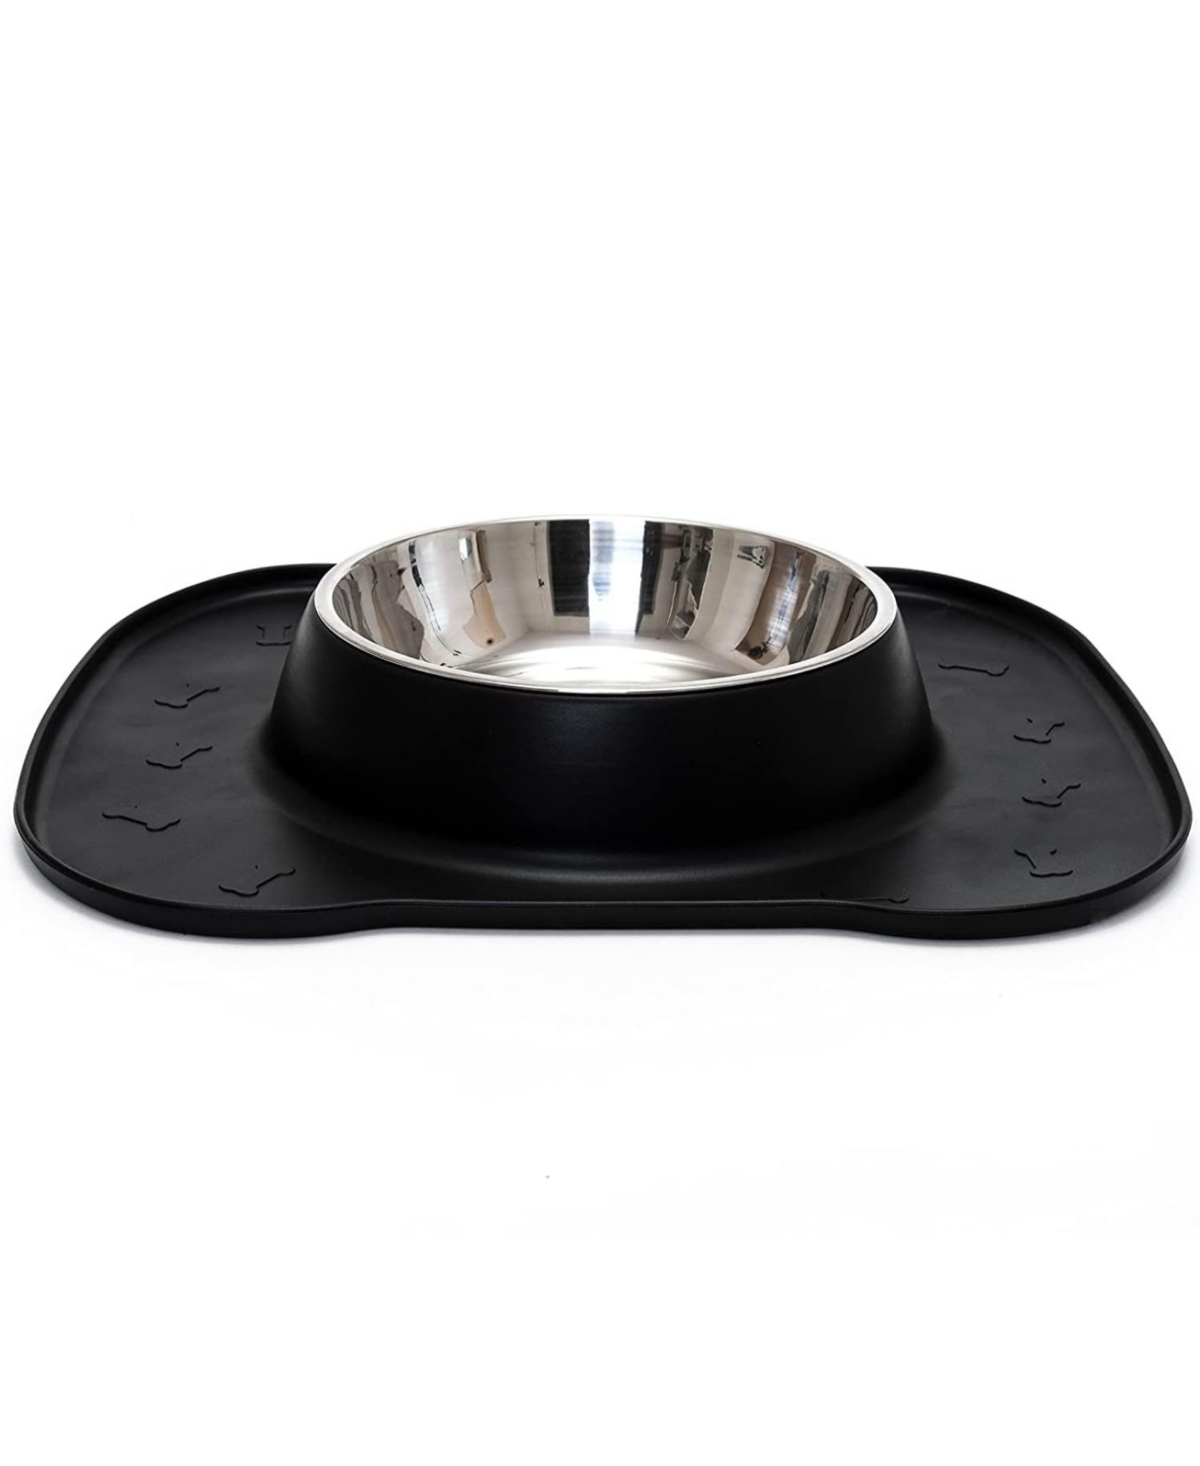 Silicone Dog Bowl Mat with Anti-Skid Feature - Black